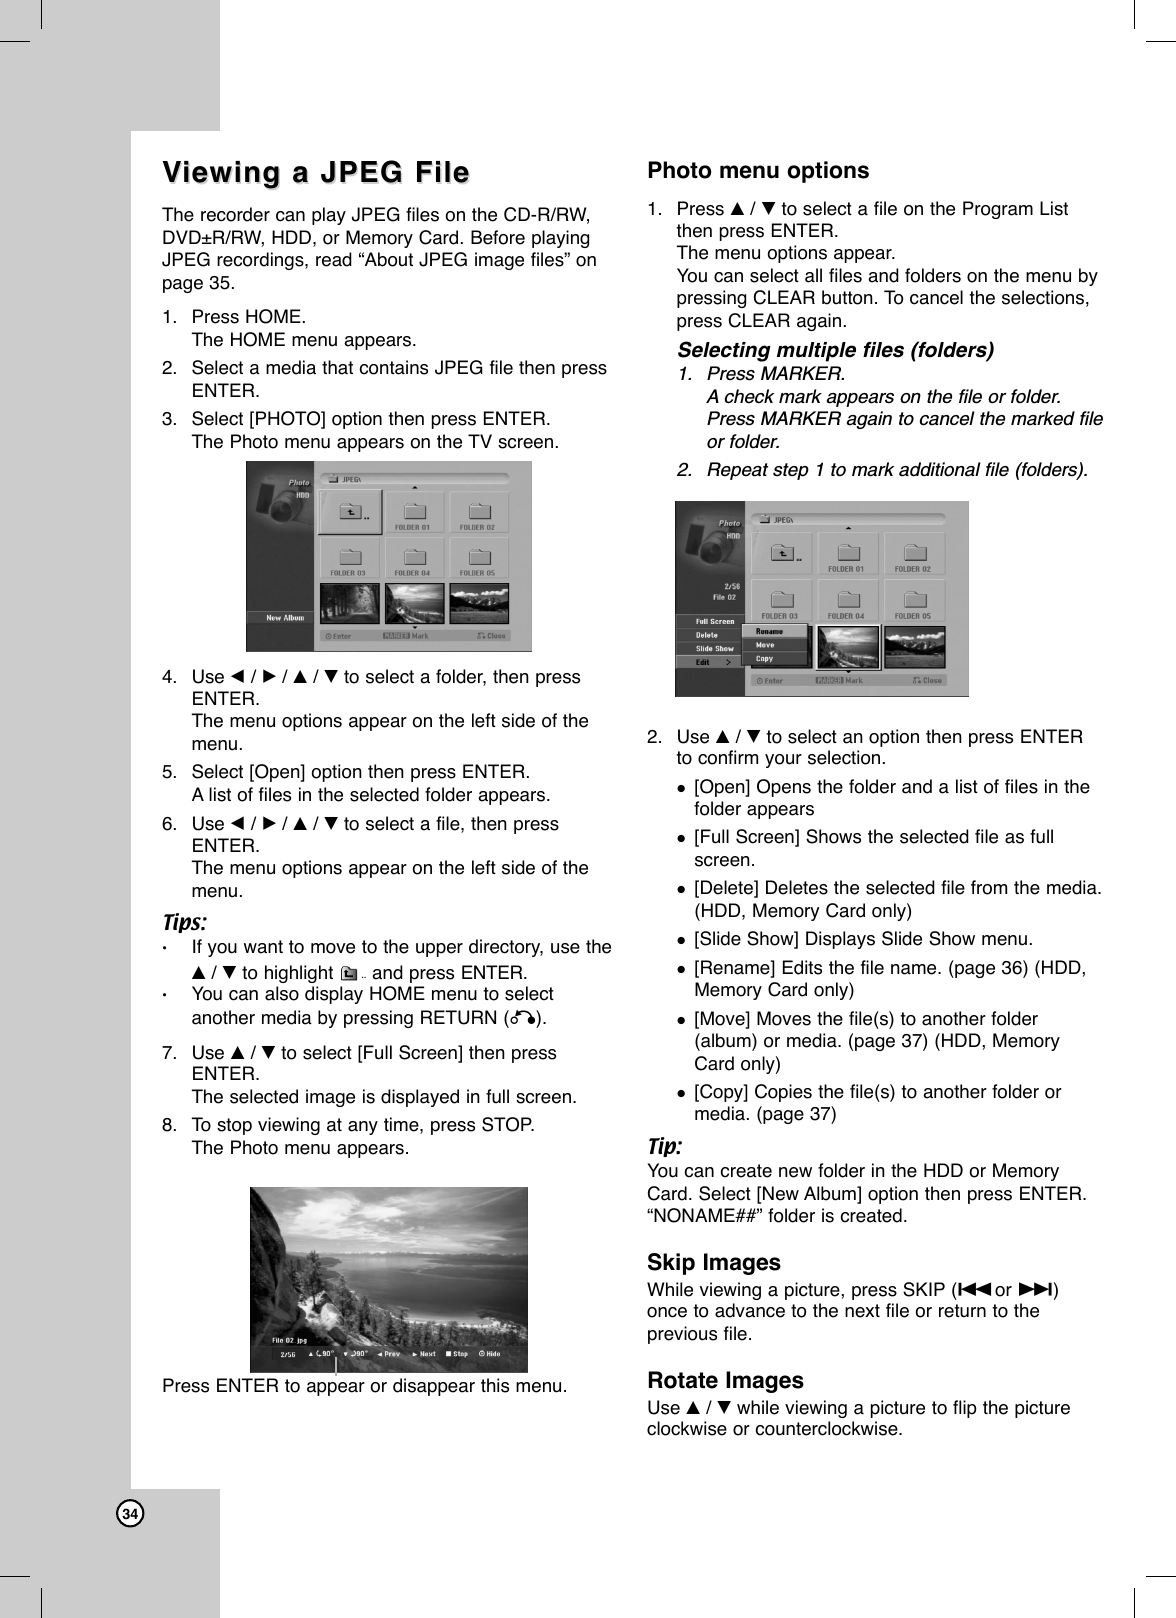 34VViewing a JPEG Fileiewing a JPEG FileThe recorder can play JPEG files on the CD-R/RW,DVD±R/RW, HDD, or Memory Card. Before playingJPEG recordings, read “About JPEG image files” on page 35.1. Press HOME.The HOME menu appears.2. Select a media that contains JPEG file then pressENTER.3. Select [PHOTO] option then press ENTER.The Photo menu appears on the TV screen.4. Use b/ B/ v/ Vto select a folder, then pressENTER.The menu options appear on the left side of themenu.5. Select [Open] option then press ENTER.Alist of files in the selected folder appears.6. Use b/ B/ v/ Vto select a file, then pressENTER.The menu options appear on the left side of themenu.Tips:•If you want to move to the upper directory, use the v/ Vto highlight and press ENTER.•You can also display HOME menu to selectanother media by pressing RETURN (O).7. Use v/ Vto select [Full Screen] then pressENTER.The selected image is displayed in full screen.8. To stop viewing at any time, press STOP.The Photo menu appears.Photo menu options1. Press v/Vto select a file on the Program Listthen press ENTER. The menu options appear.You can select all files and folders on the menu bypressing CLEAR button. To cancel the selections,press CLEAR again.Selecting multiple files (folders)1. Press MARKER.Acheck mark appears on the file or folder.Press MARKER again to cancel the marked fileor folder. 2. Repeat step 1 to mark additional file (folders).2. Use v/ Vto select an option then press ENTERto confirm your selection.[Open] Opens the folder and a list of files in thefolder appears[Full Screen] Shows the selected file as fullscreen.[Delete] Deletes the selected file from the media.(HDD, Memory Card only)[Slide Show] Displays Slide Show menu. [Rename] Edits the file name. (page 36) (HDD,Memory Card only)[Move] Moves the file(s) to another folder(album) or media. (page 37) (HDD, MemoryCard only)[Copy] Copies the file(s) to another folder ormedia. (page 37)Tip:You can create new folder in the HDD or MemoryCard. Select [New Album] option then press ENTER.“NONAME##” folder is created.Skip ImagesWhile viewing a picture, press SKIP (.or &gt;)once to advance to the next file or return to theprevious file.Rotate ImagesUse v/ Vwhile viewing a picture to flip the pictureclockwise or counterclockwise.Press ENTER to appear or disappear this menu.